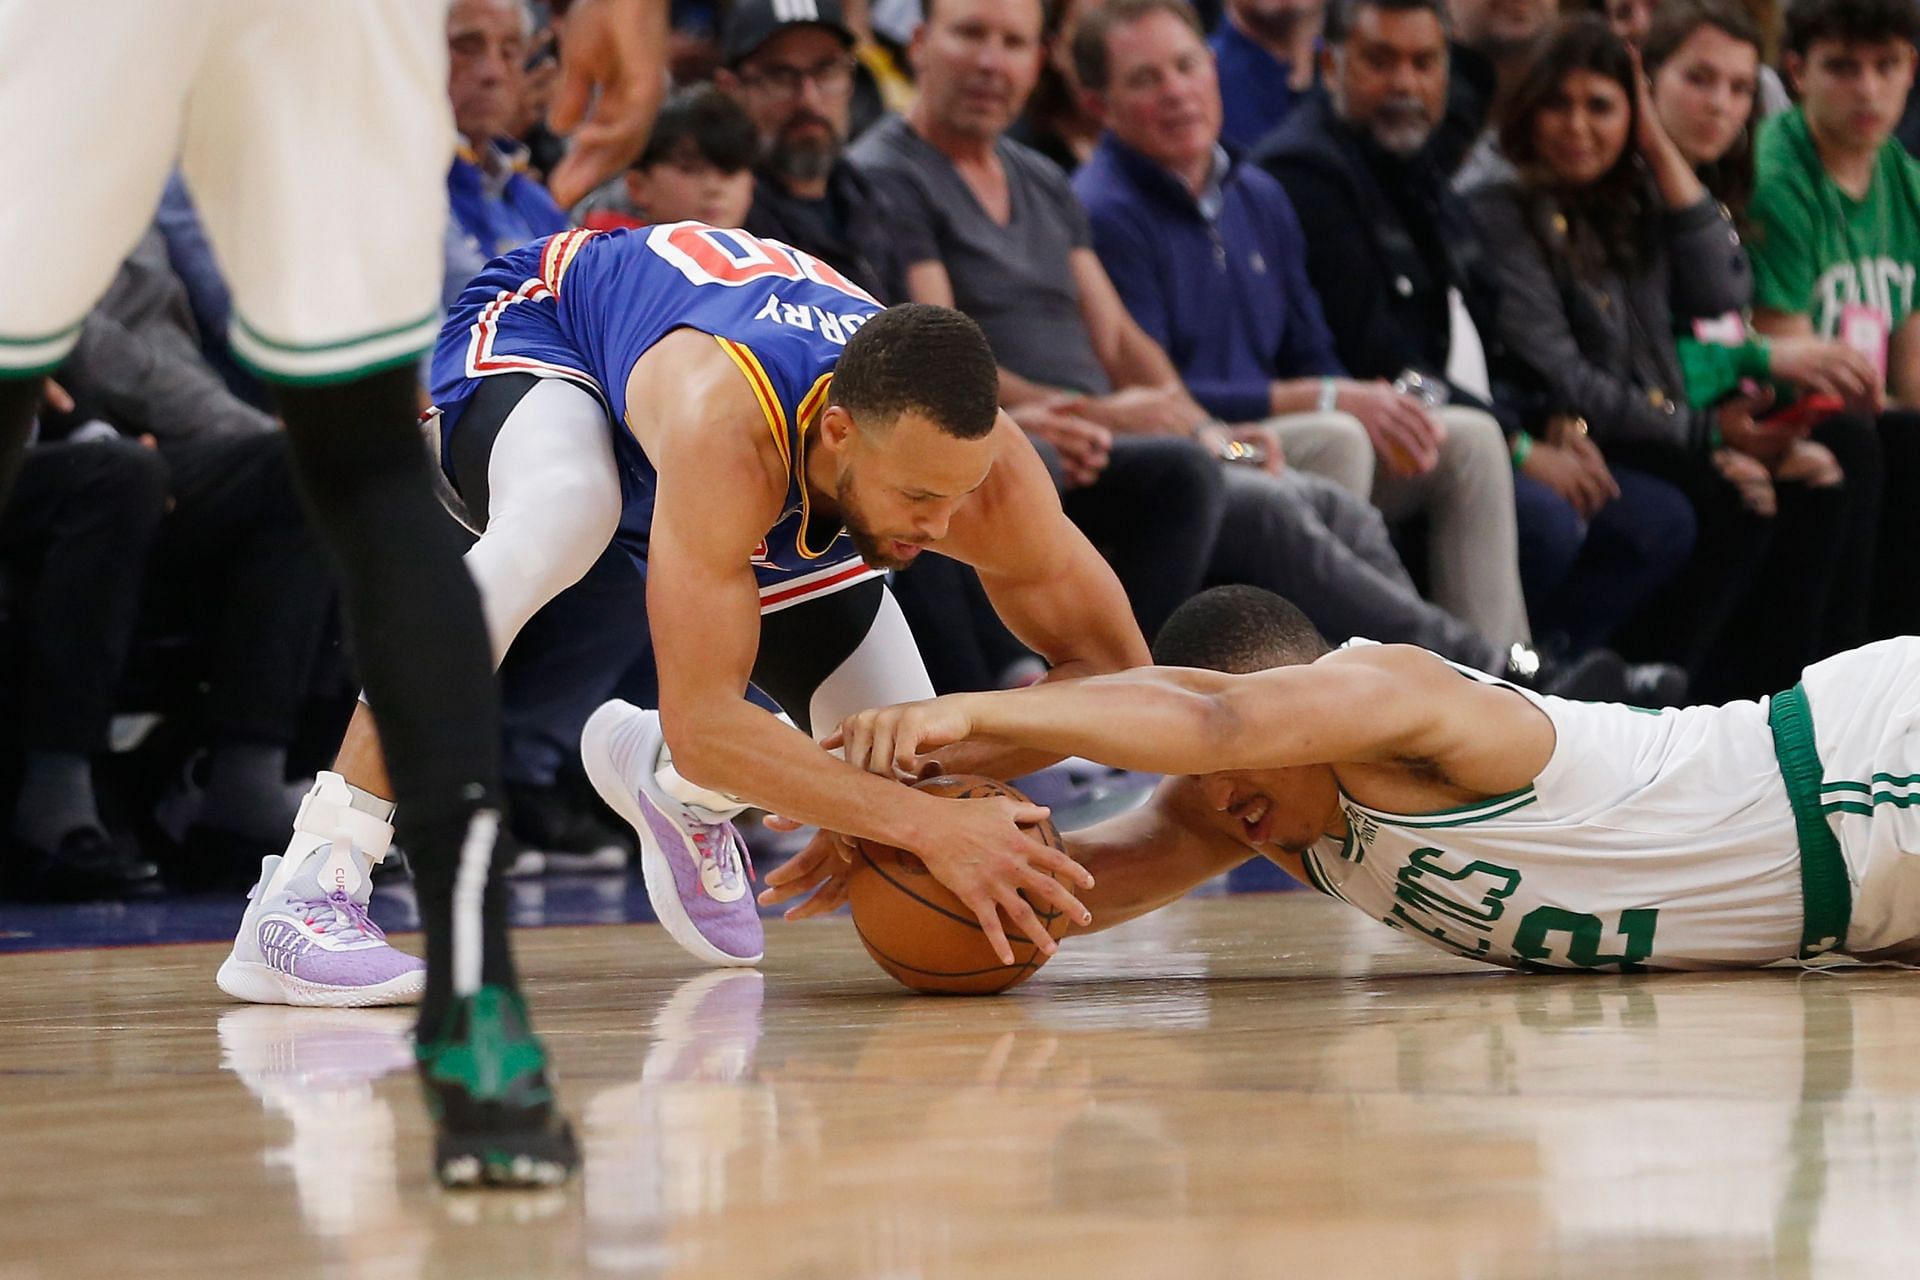 Golden State Warriors guard Steph Curry reaches for the ball against the Boston Celtics.